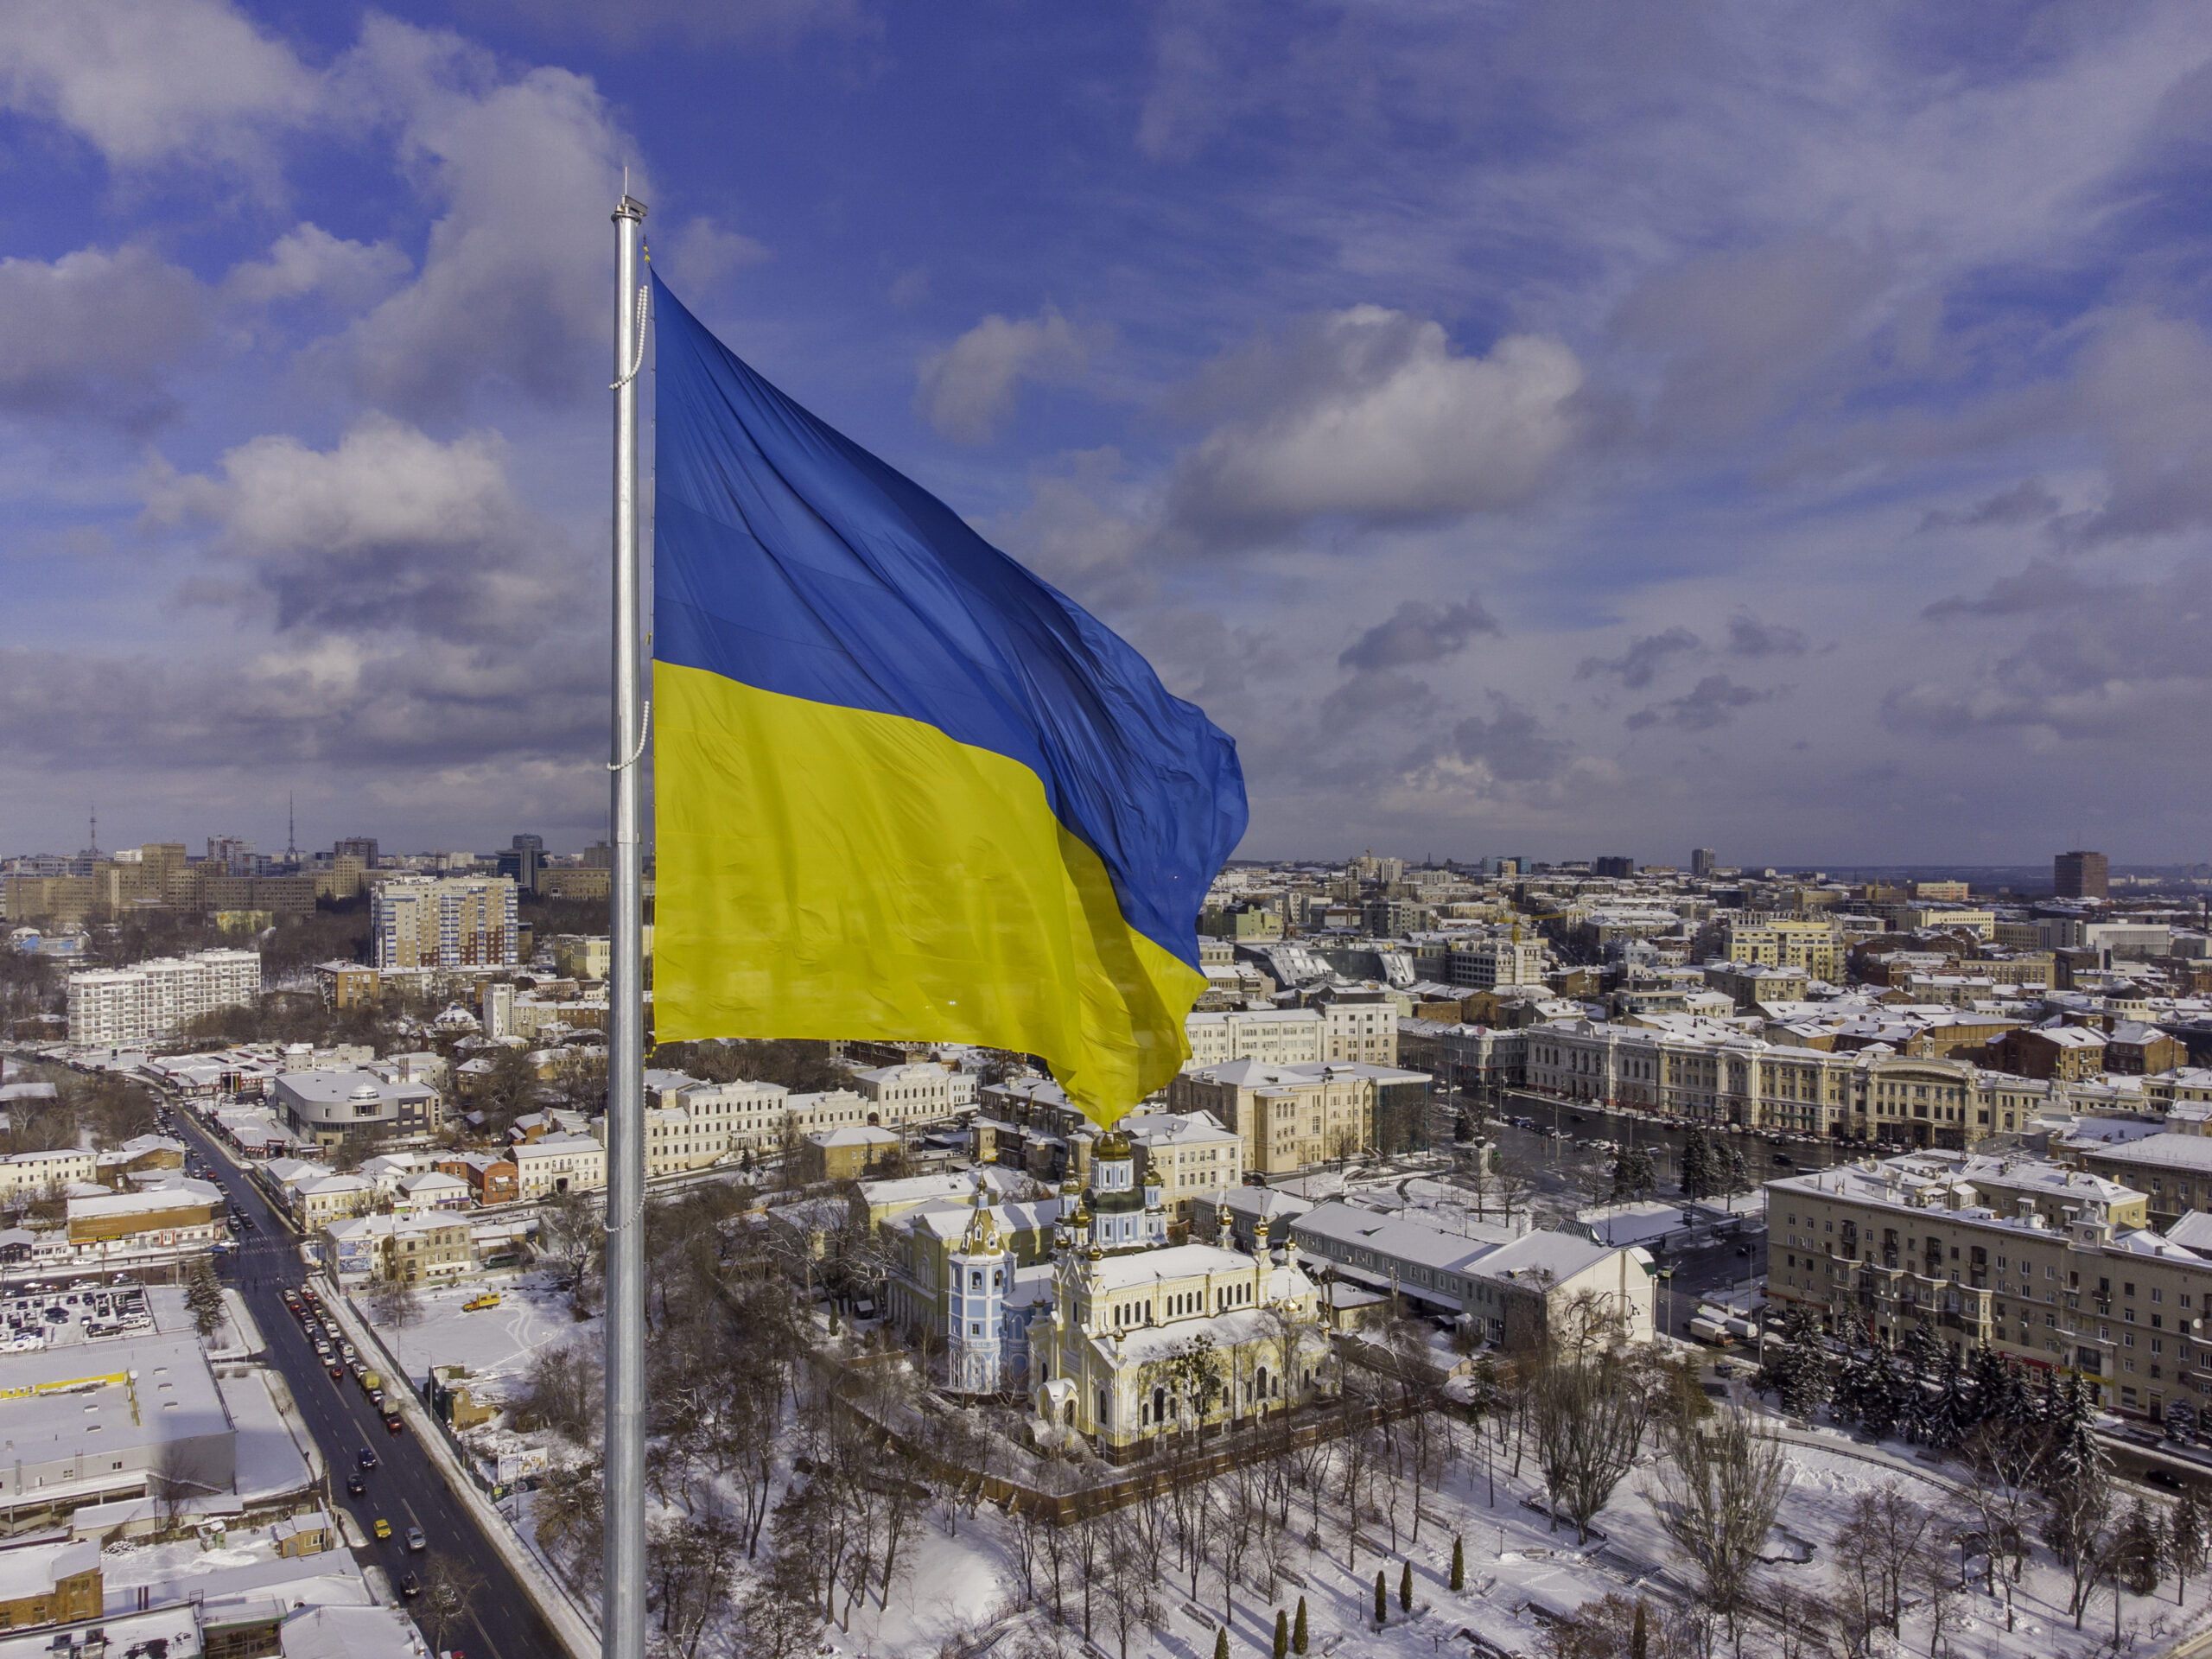 Ukrainian flag in the wind. Blue Yellow flag in the city of Kharkov